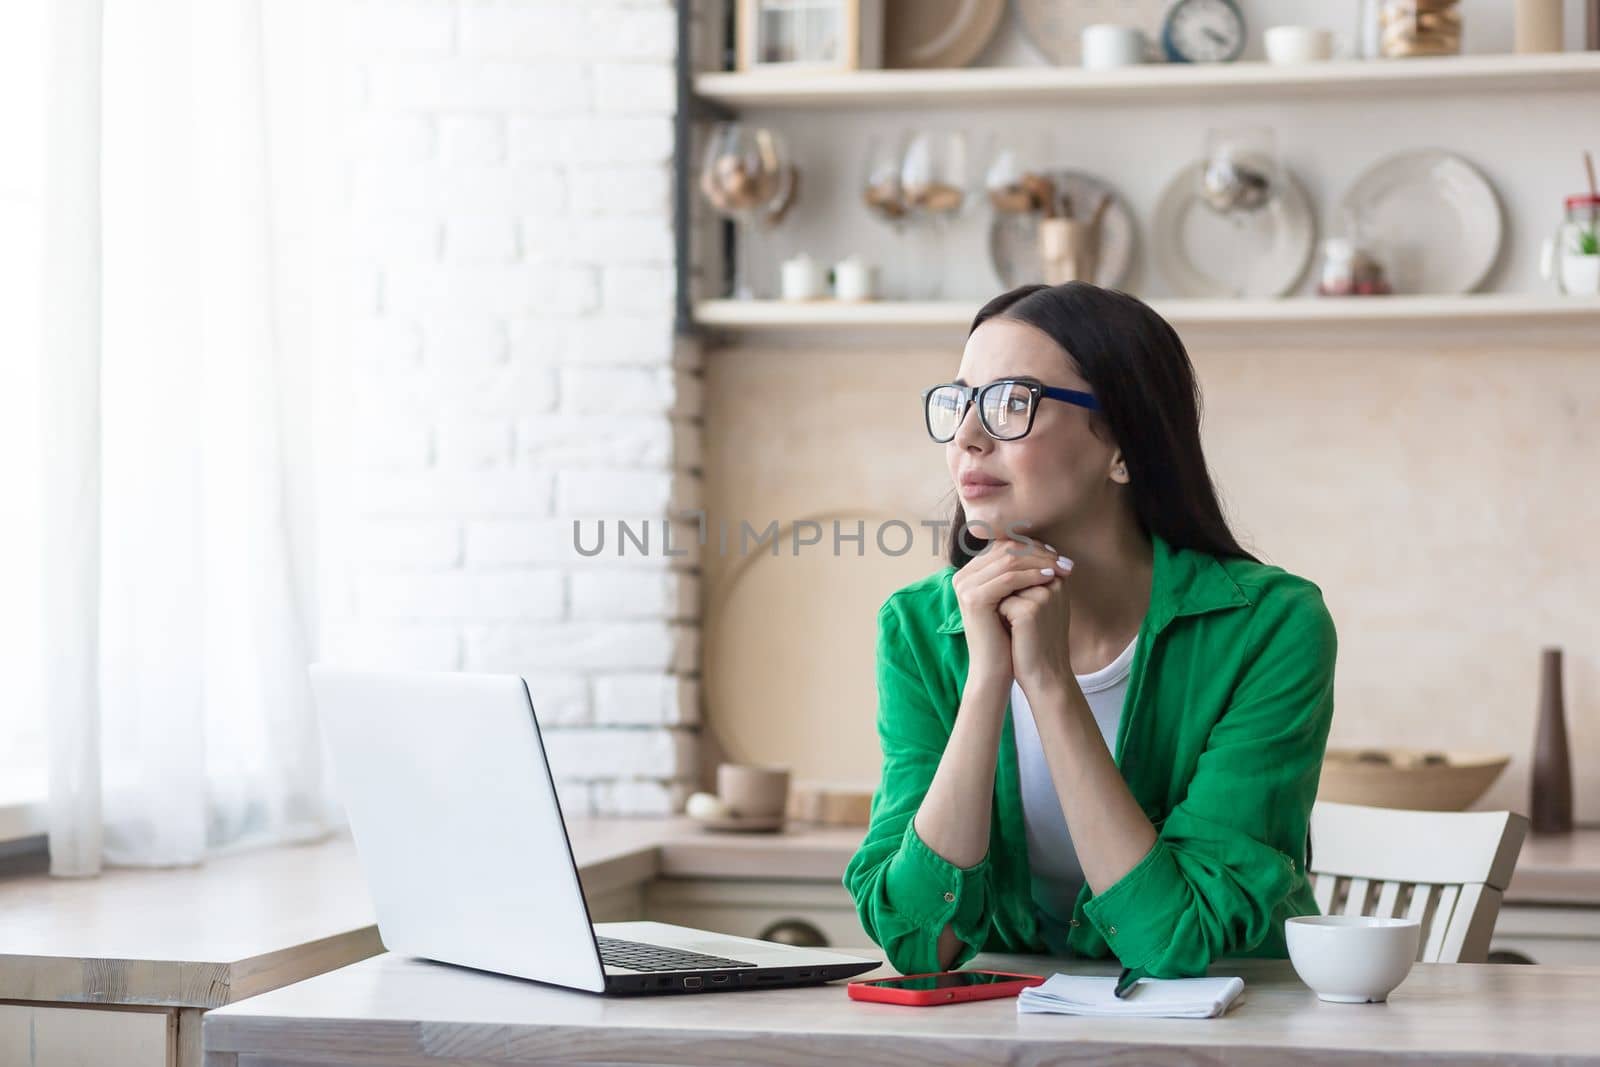 Upset young woman sitting at home in the kitchen in front of a laptop. Type on the keyboard, search, check. She looks thoughtfully out the window, resting her head on her hands.